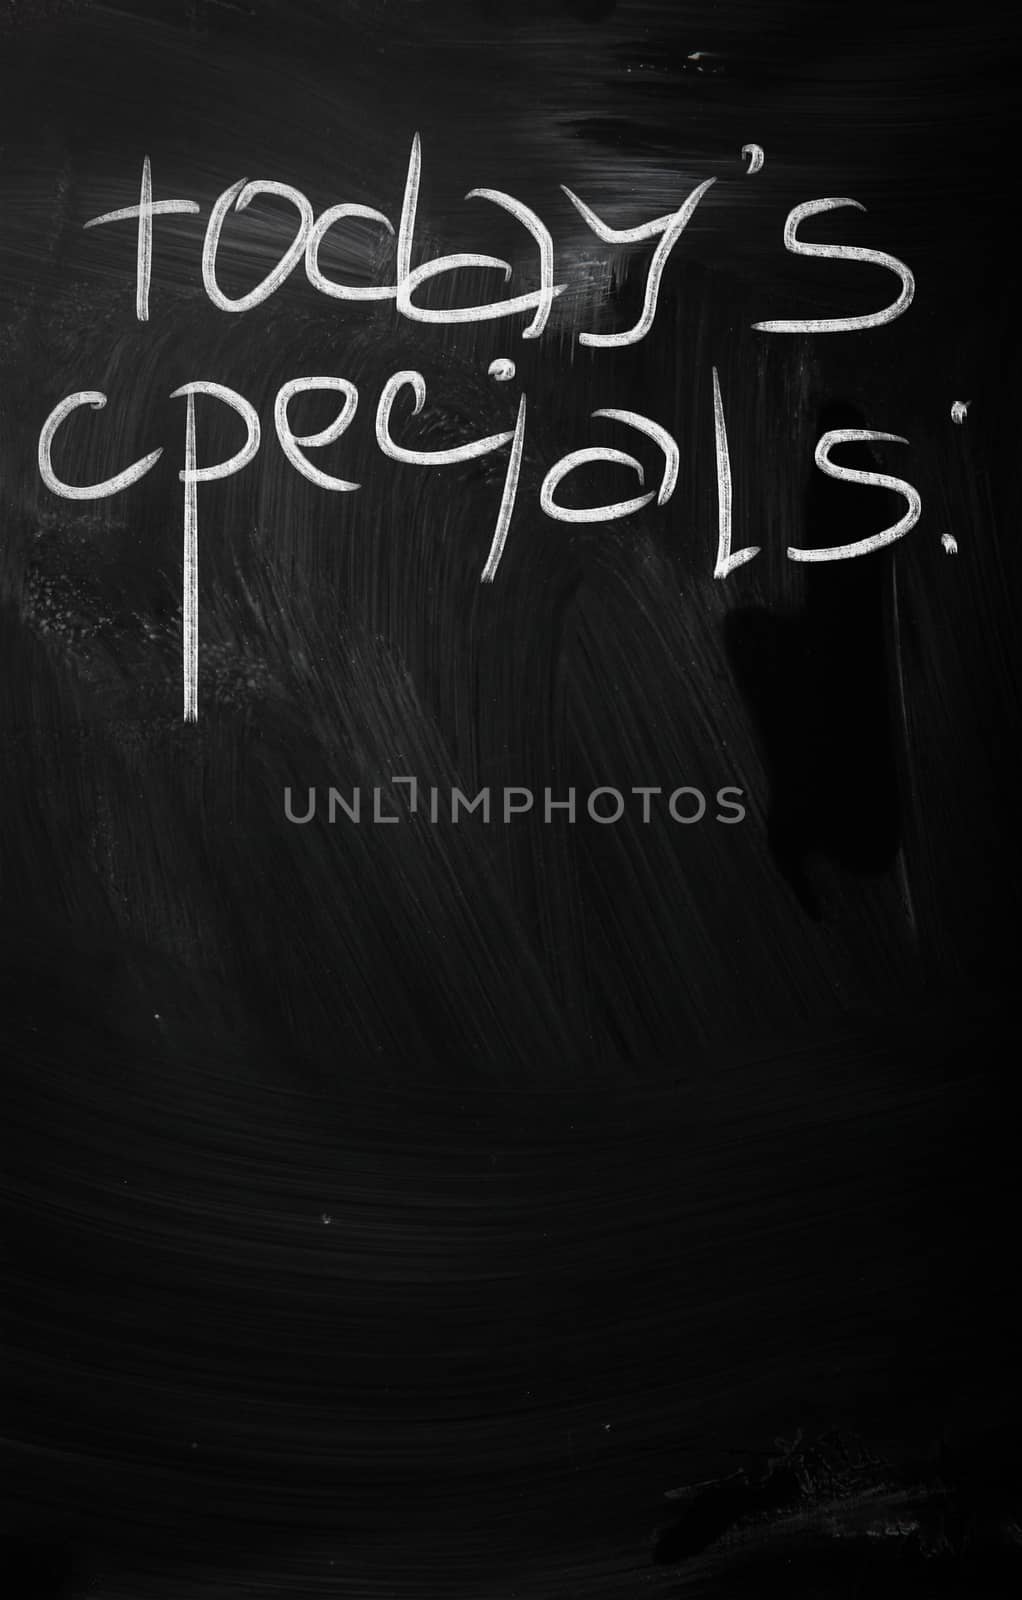 "Today's specials" handwritten with white chalk on a blackboard